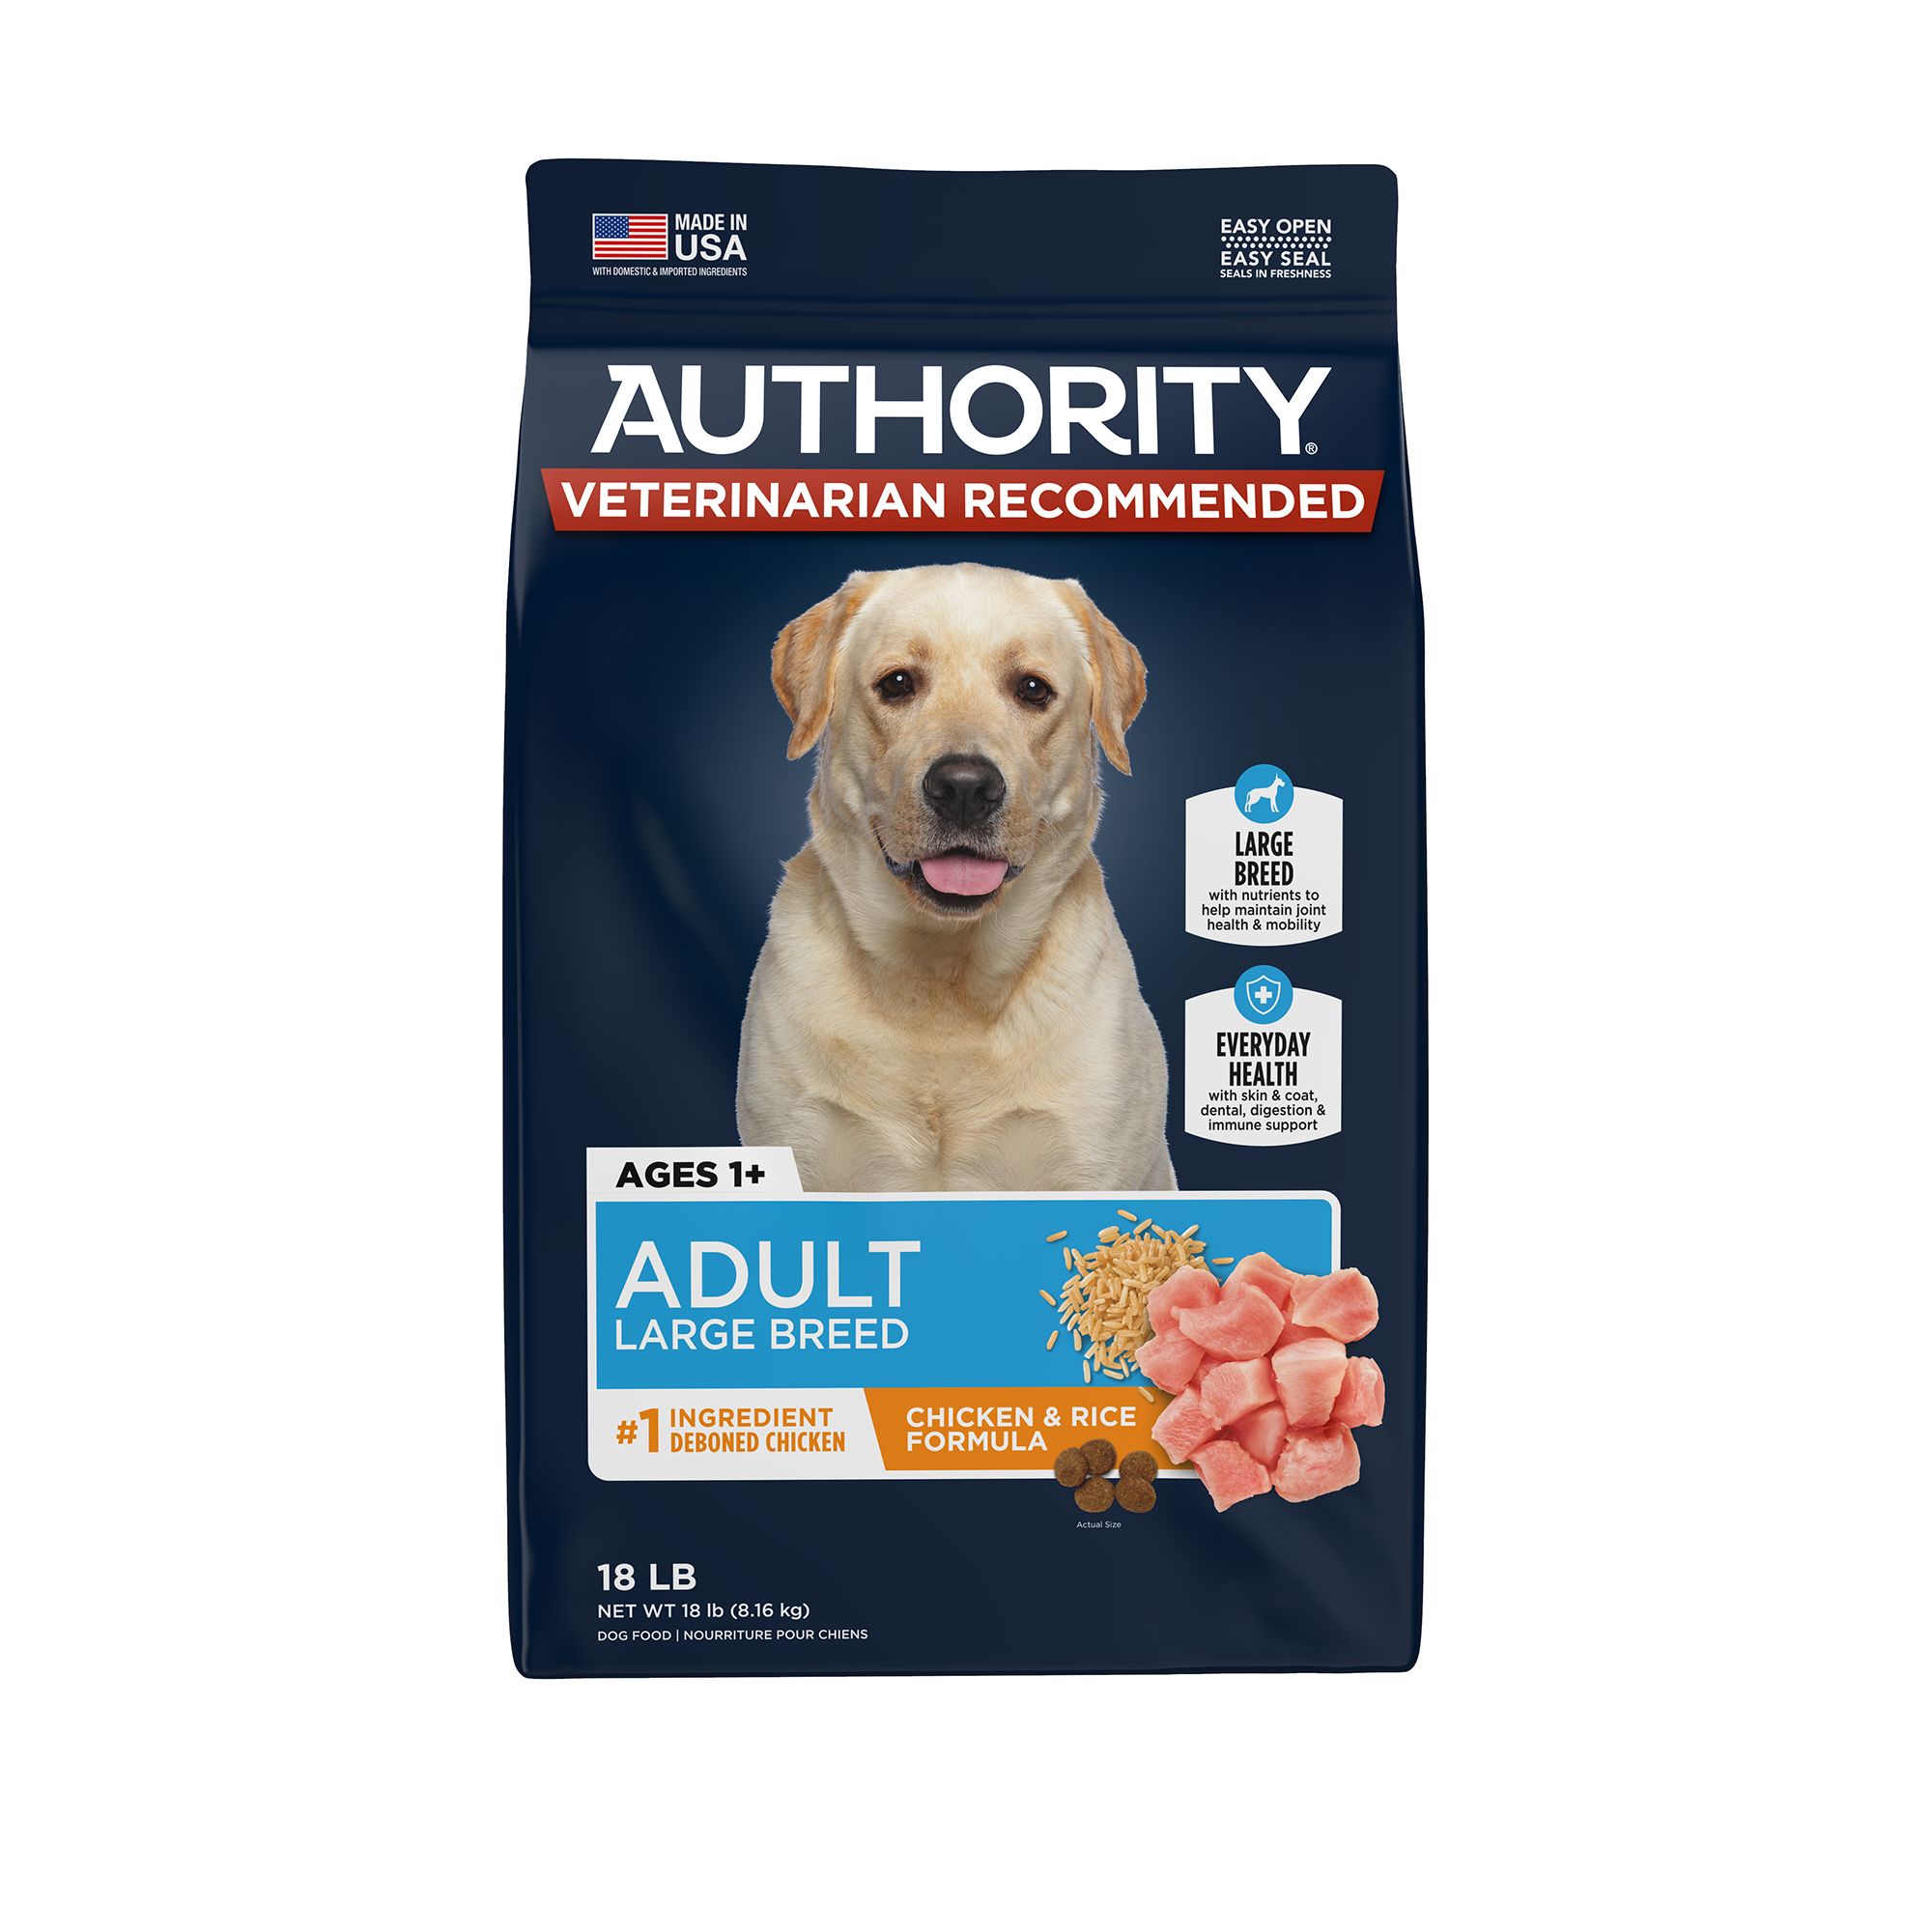 Authority Cat Food Coupon